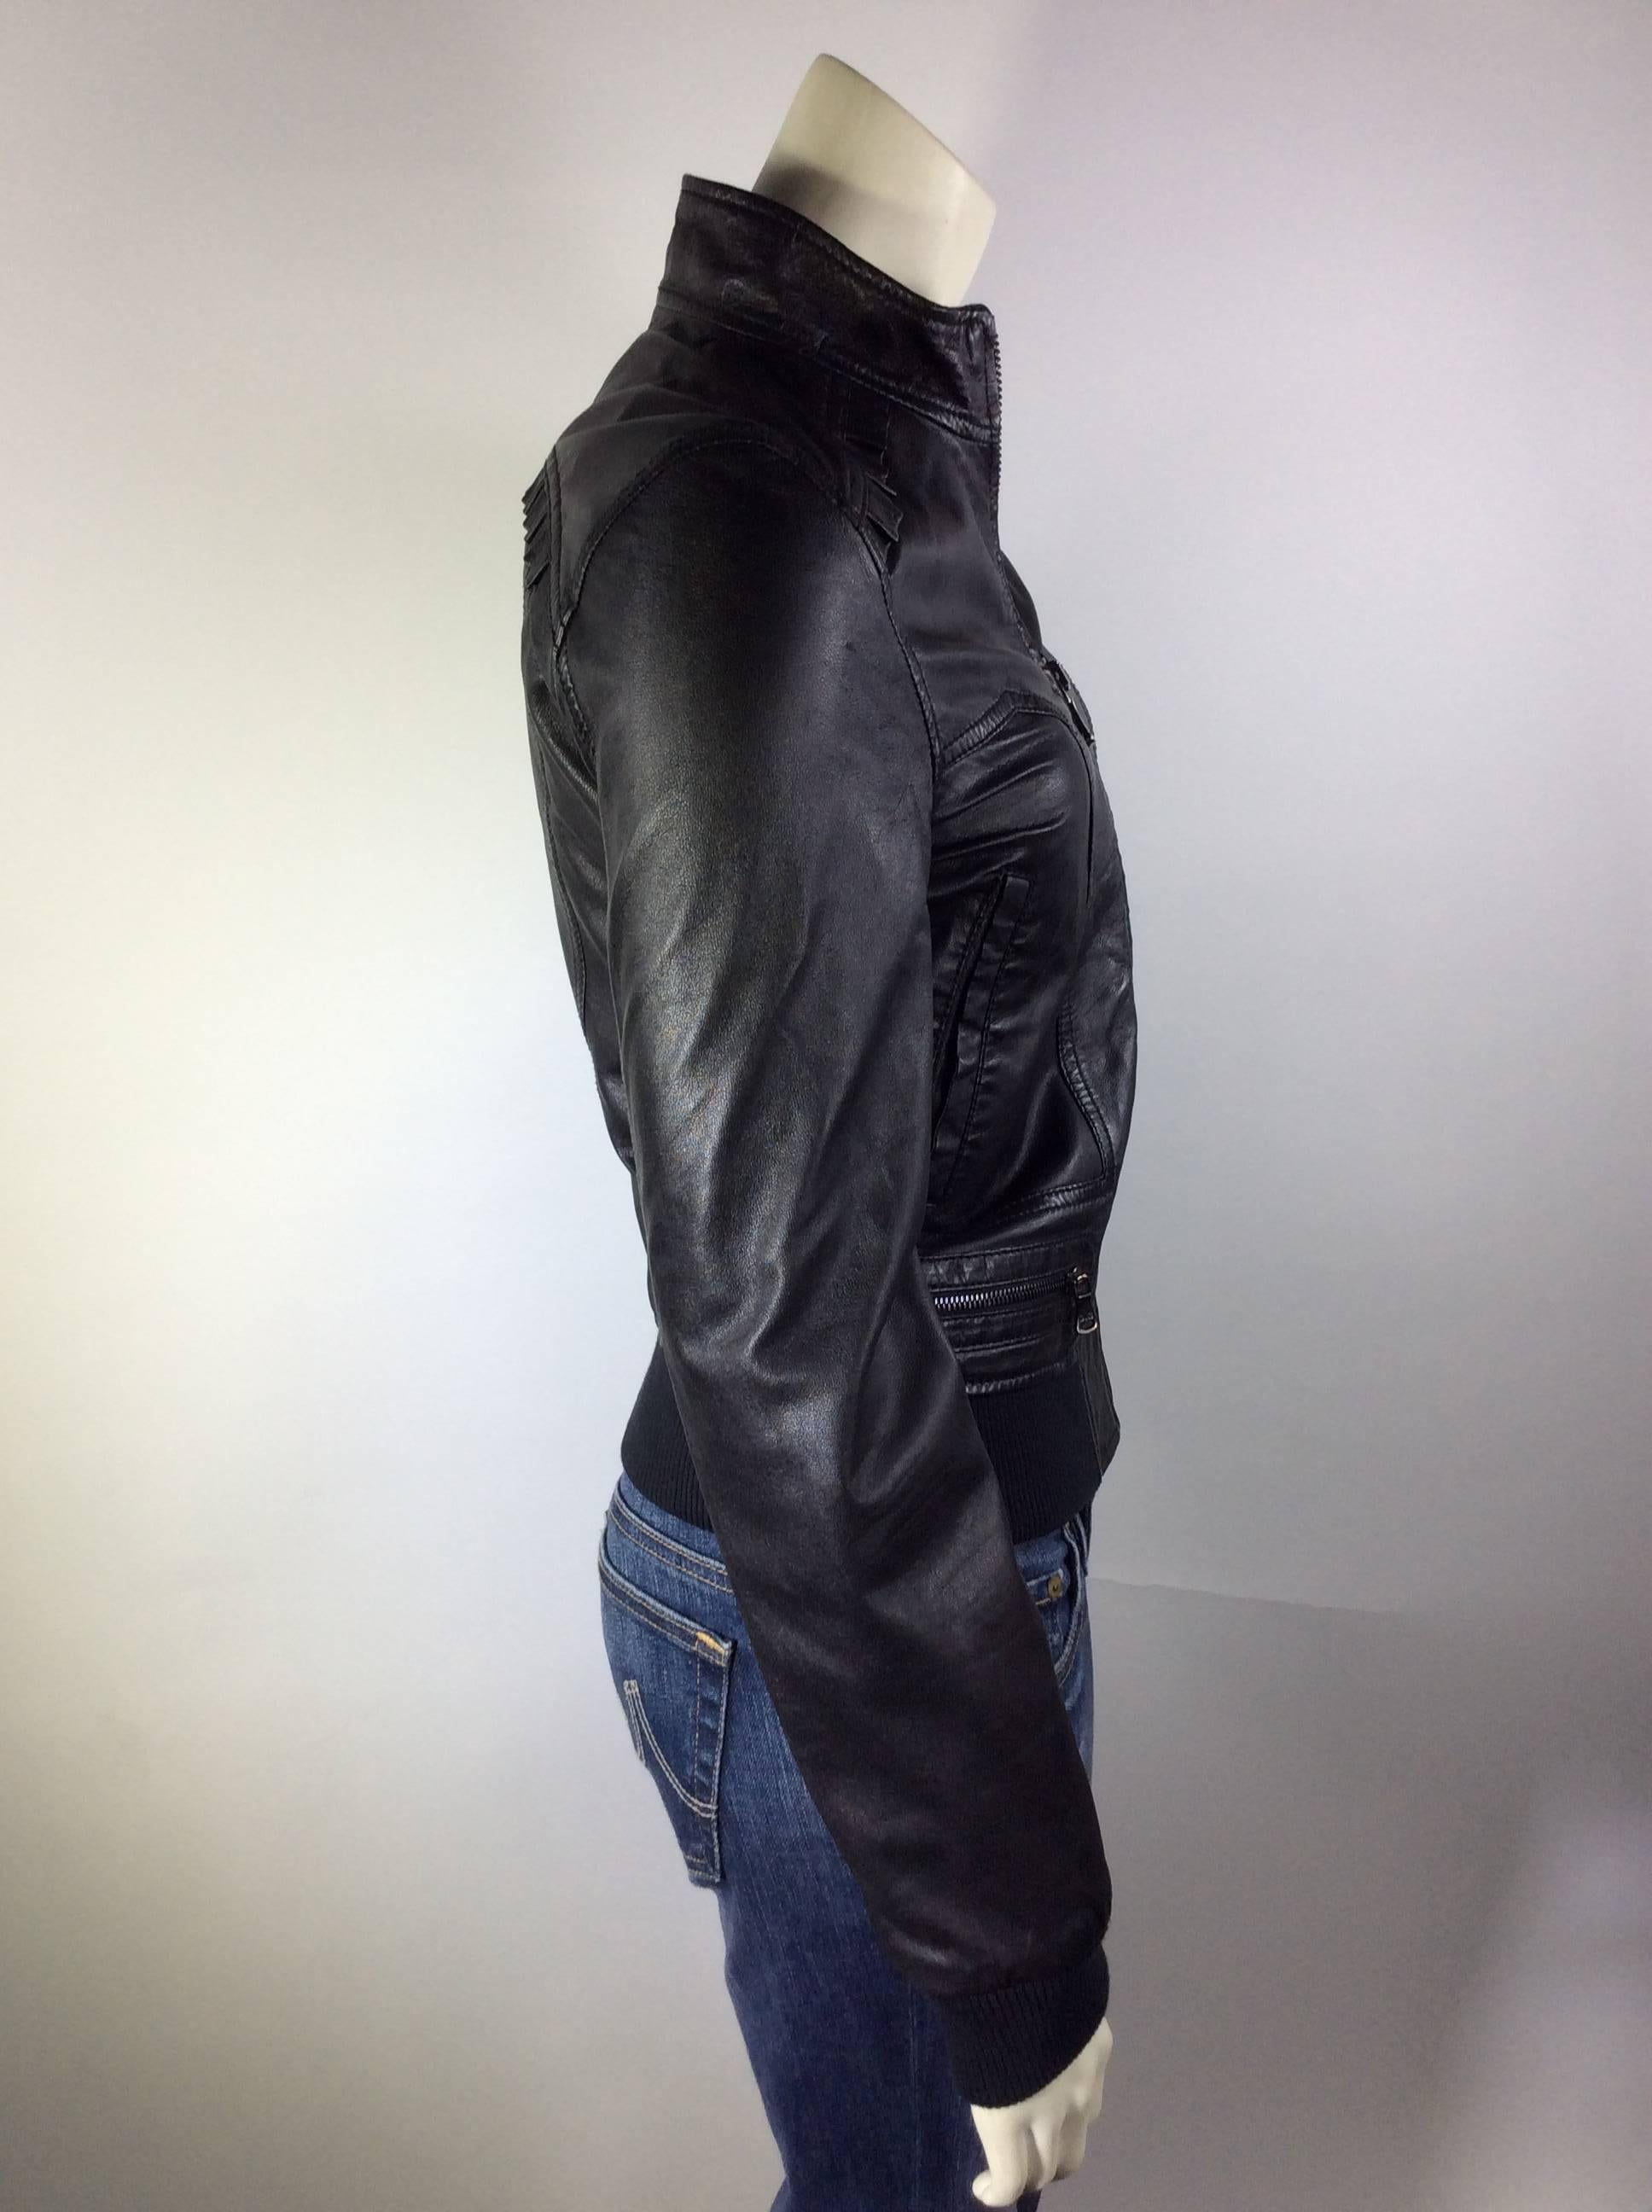 Dolce and Gabbana Black Leather Motorcycle Jacket In Excellent Condition For Sale In Narberth, PA